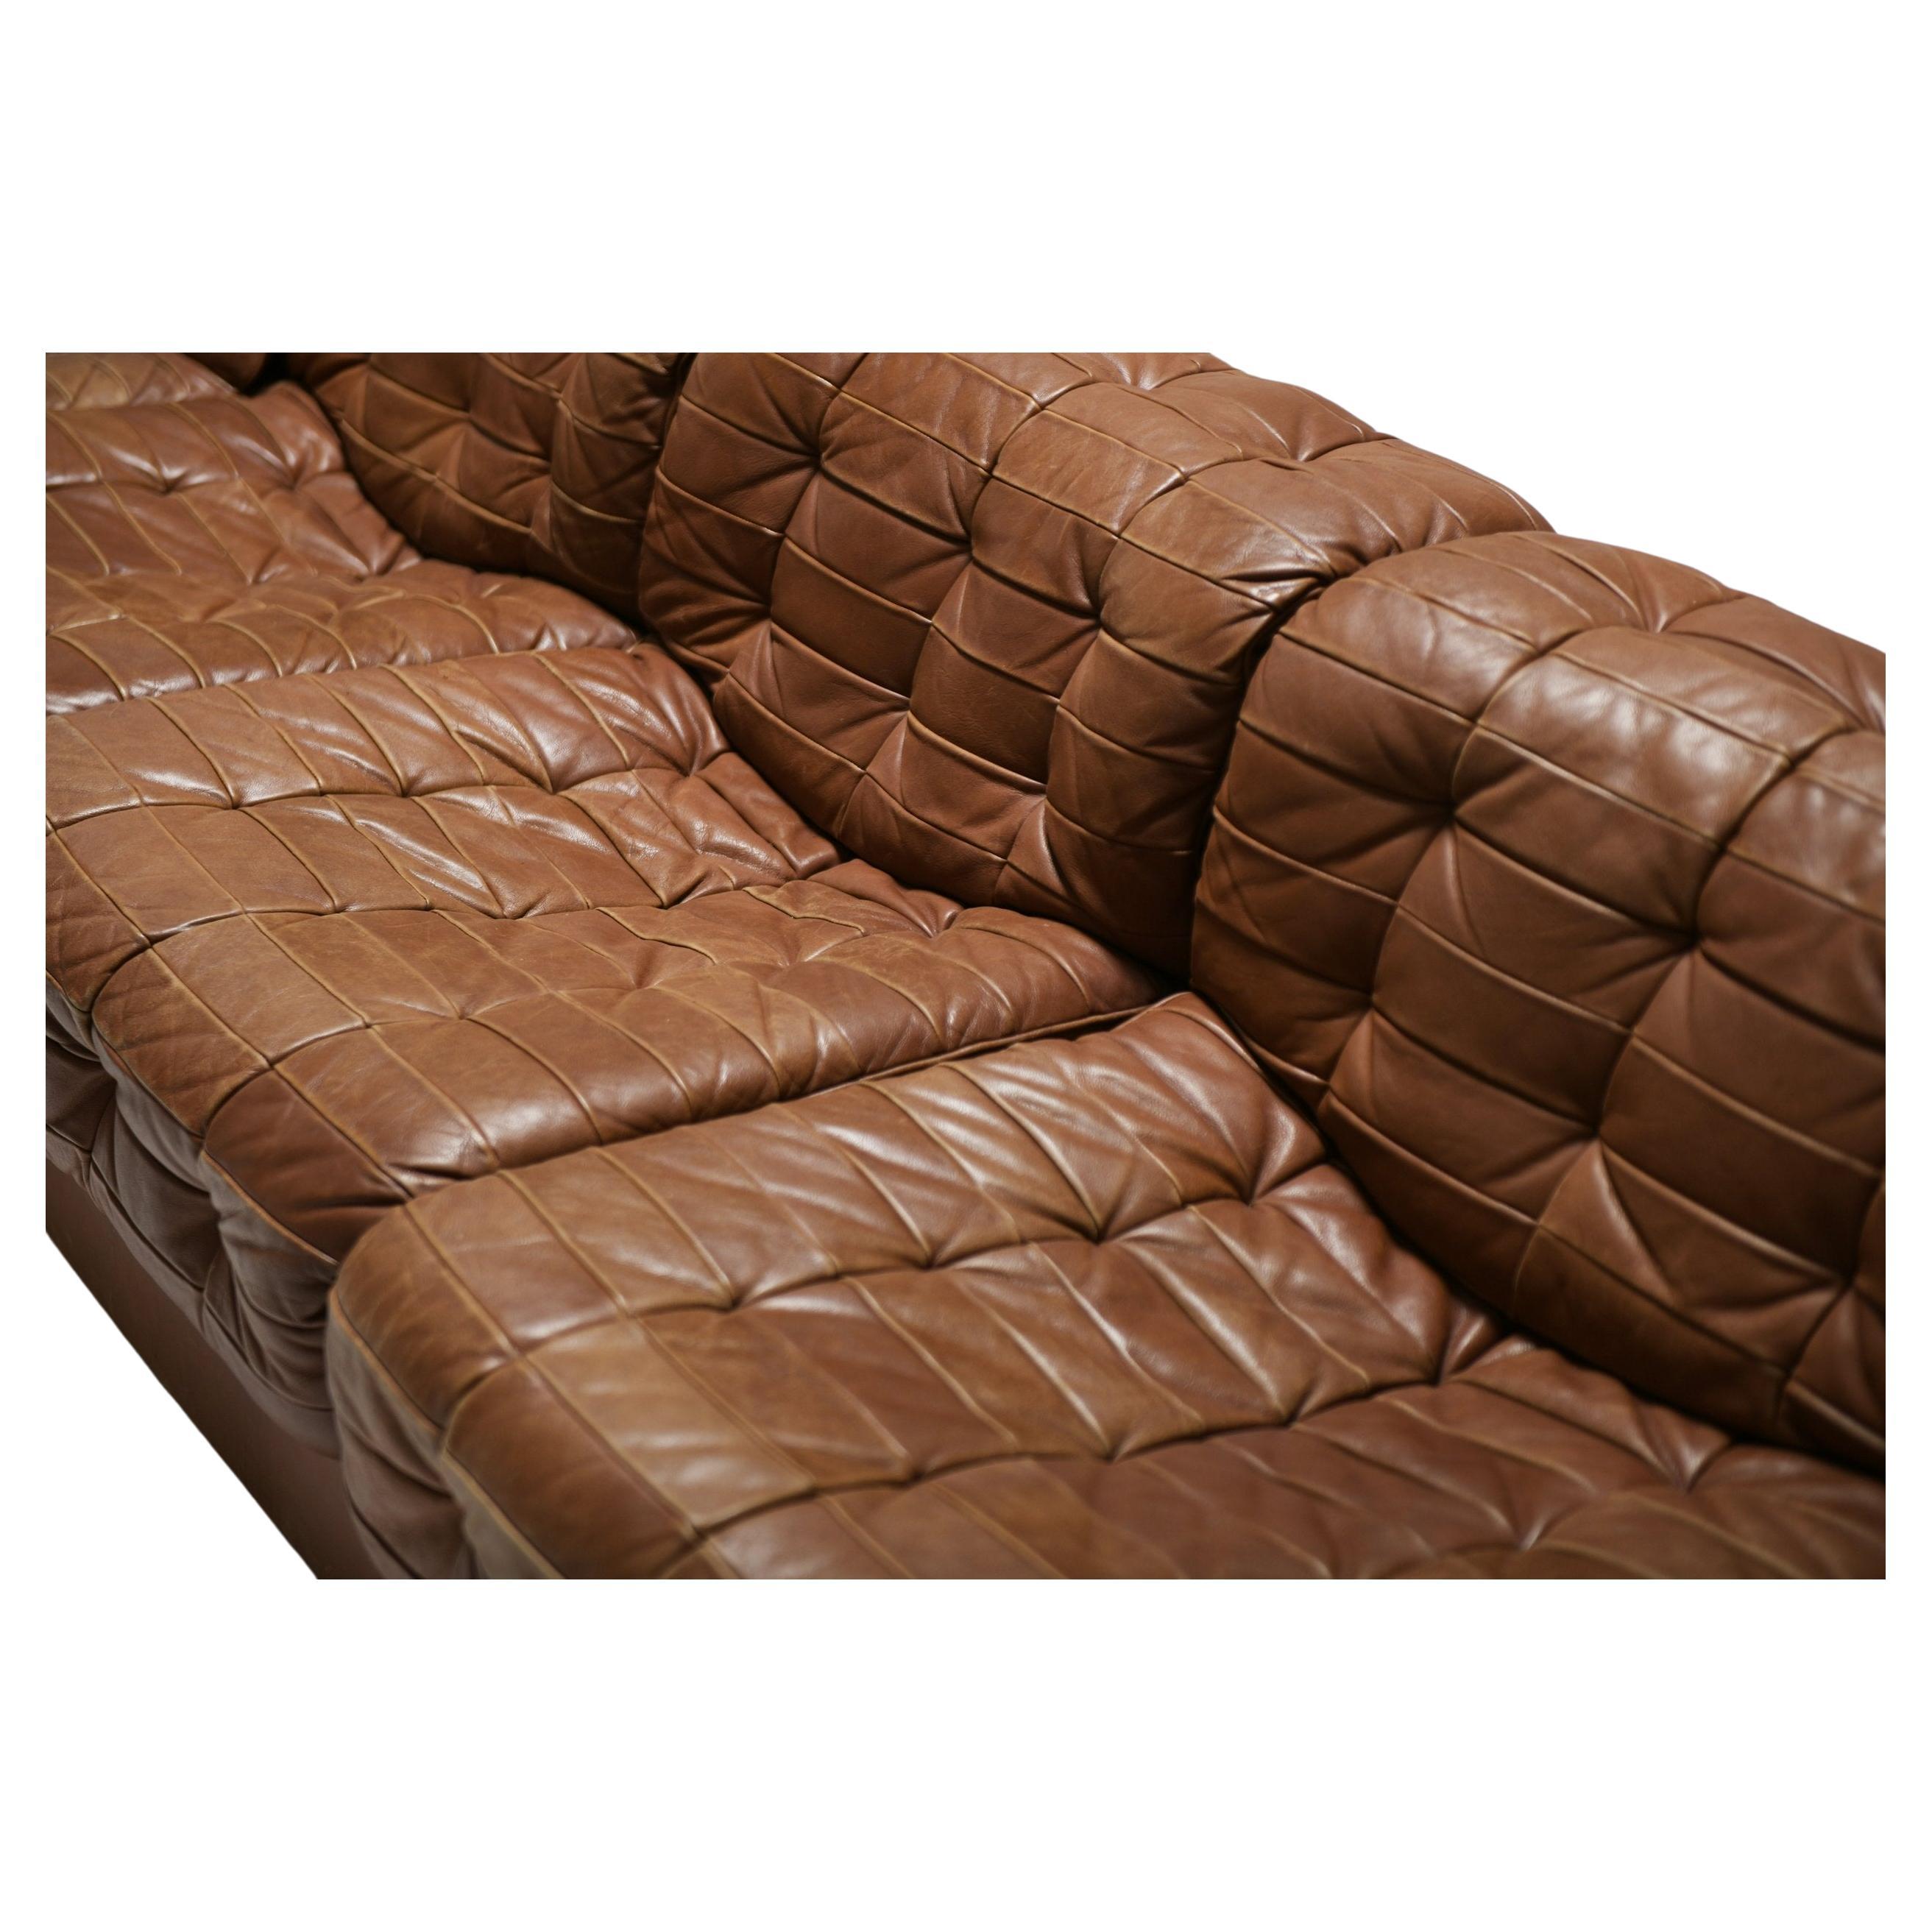 Mid-Century Modern De Sede DS11 Patchwork Leather Sectional in Caramel, Circa 1970s For Sale